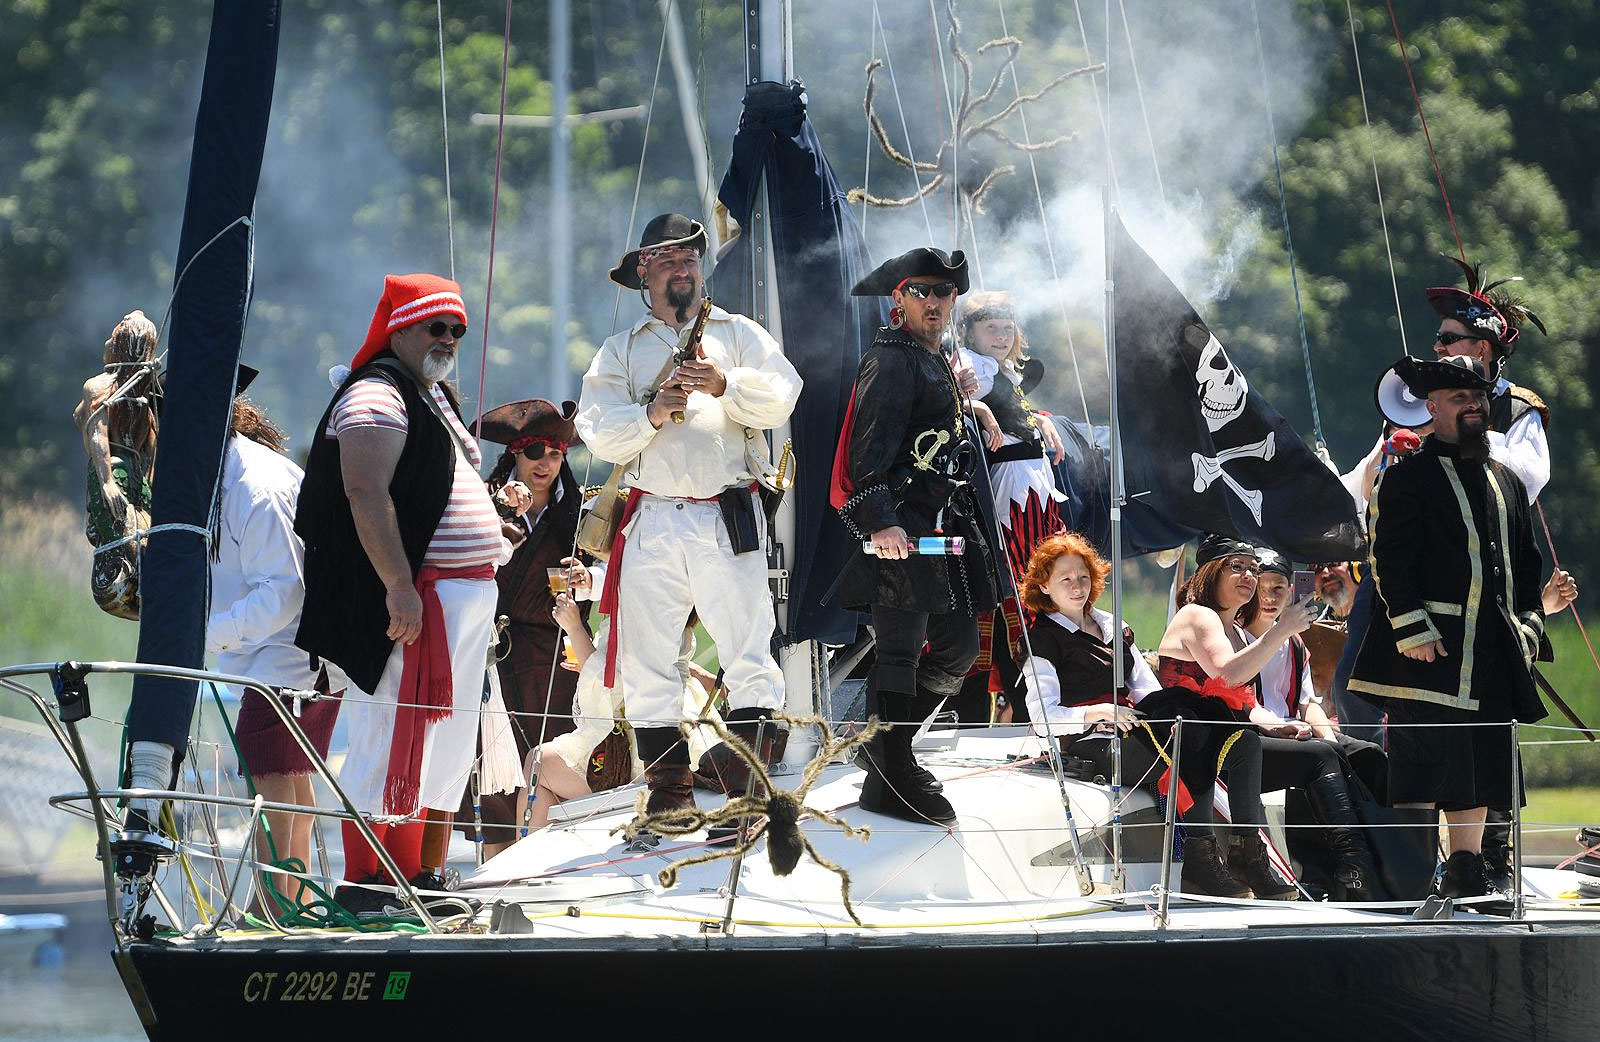 Annual Pirate's Day Downtown Milford at Lisman's Landing Kids in